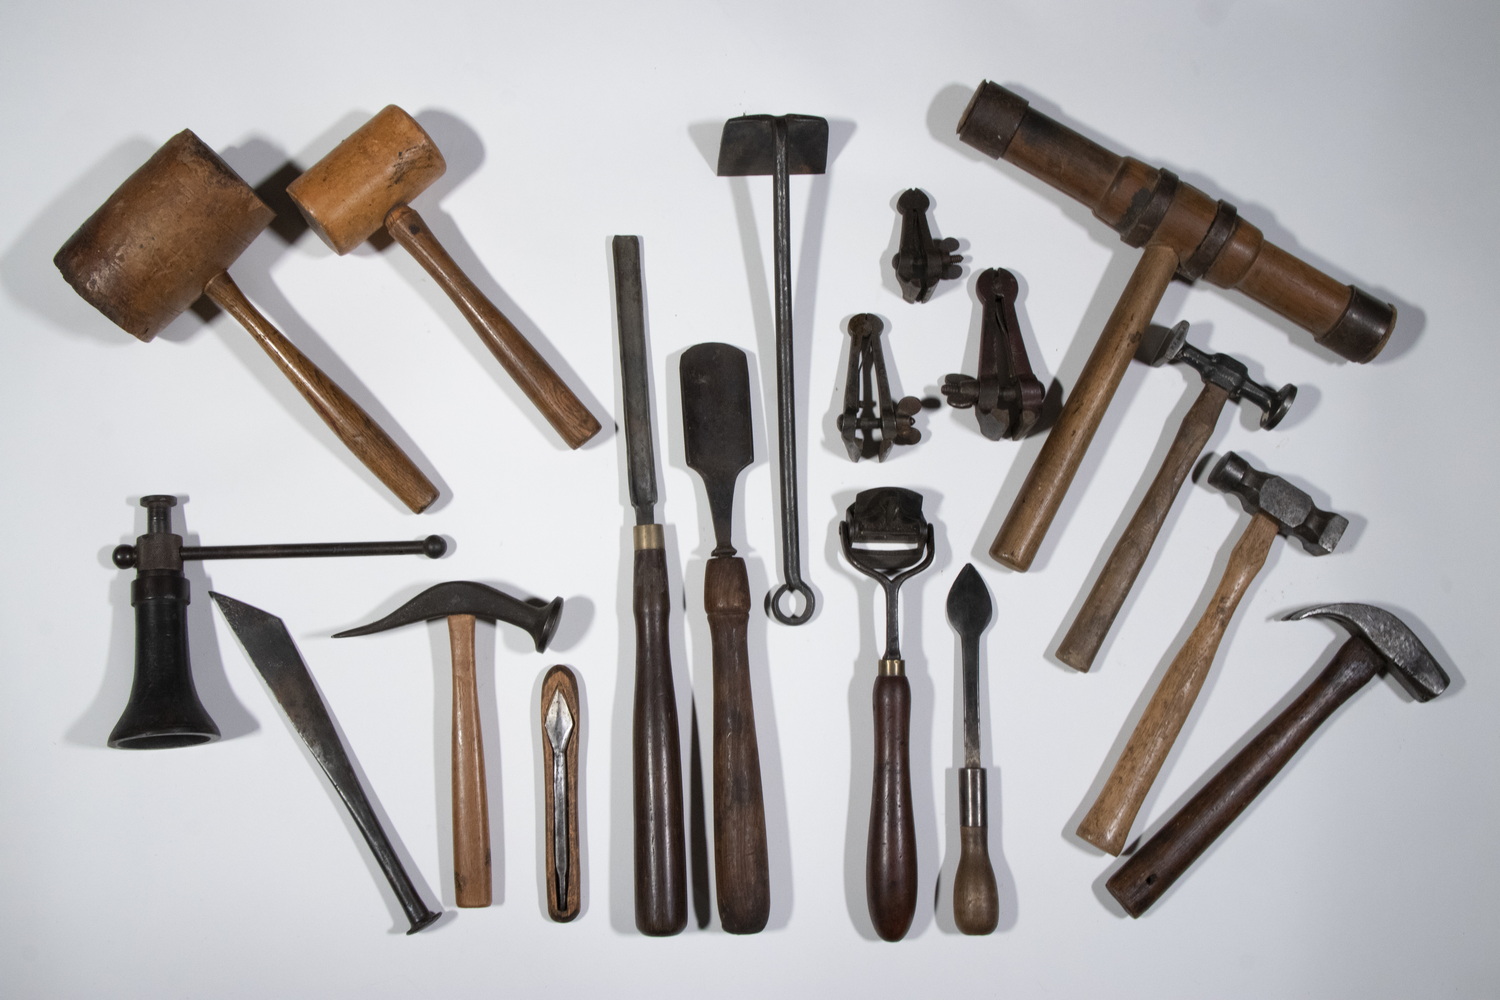 (18) EARLY SHIPWRIGHT'S TOOLS Including: